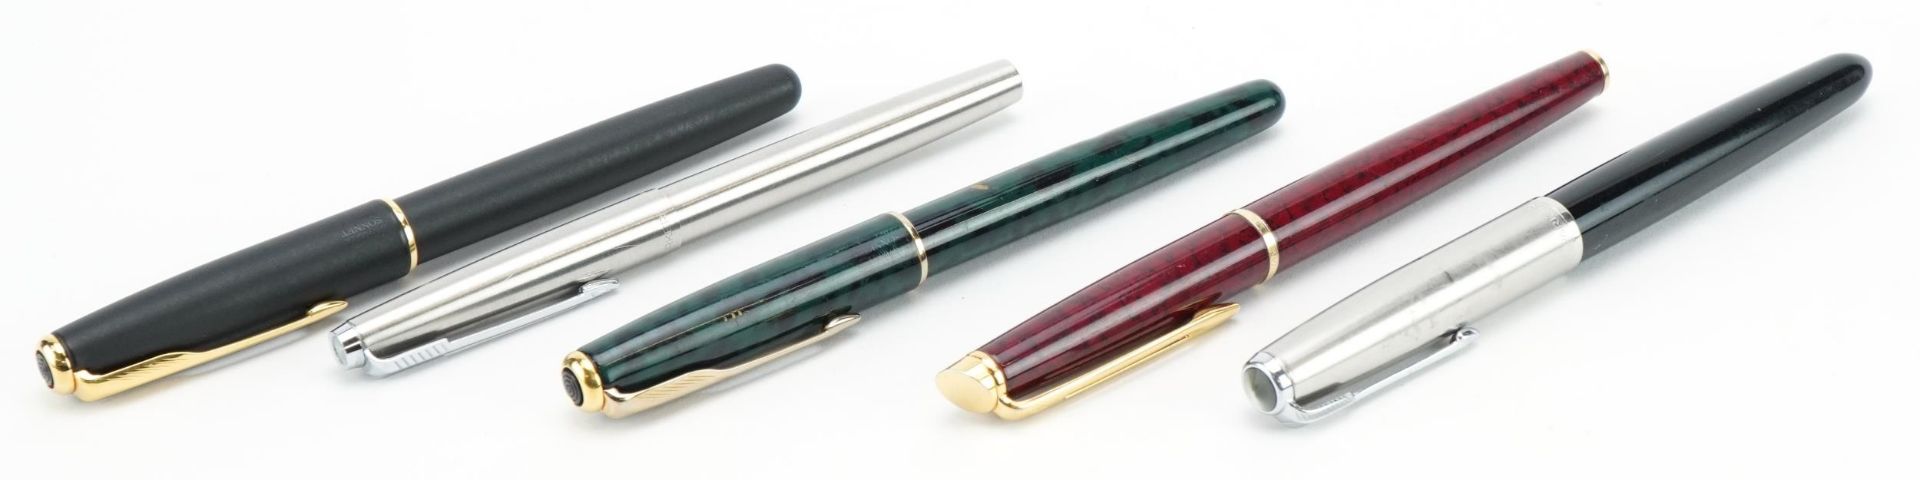 Five Parker and Watermans ballpoint and fountain pens